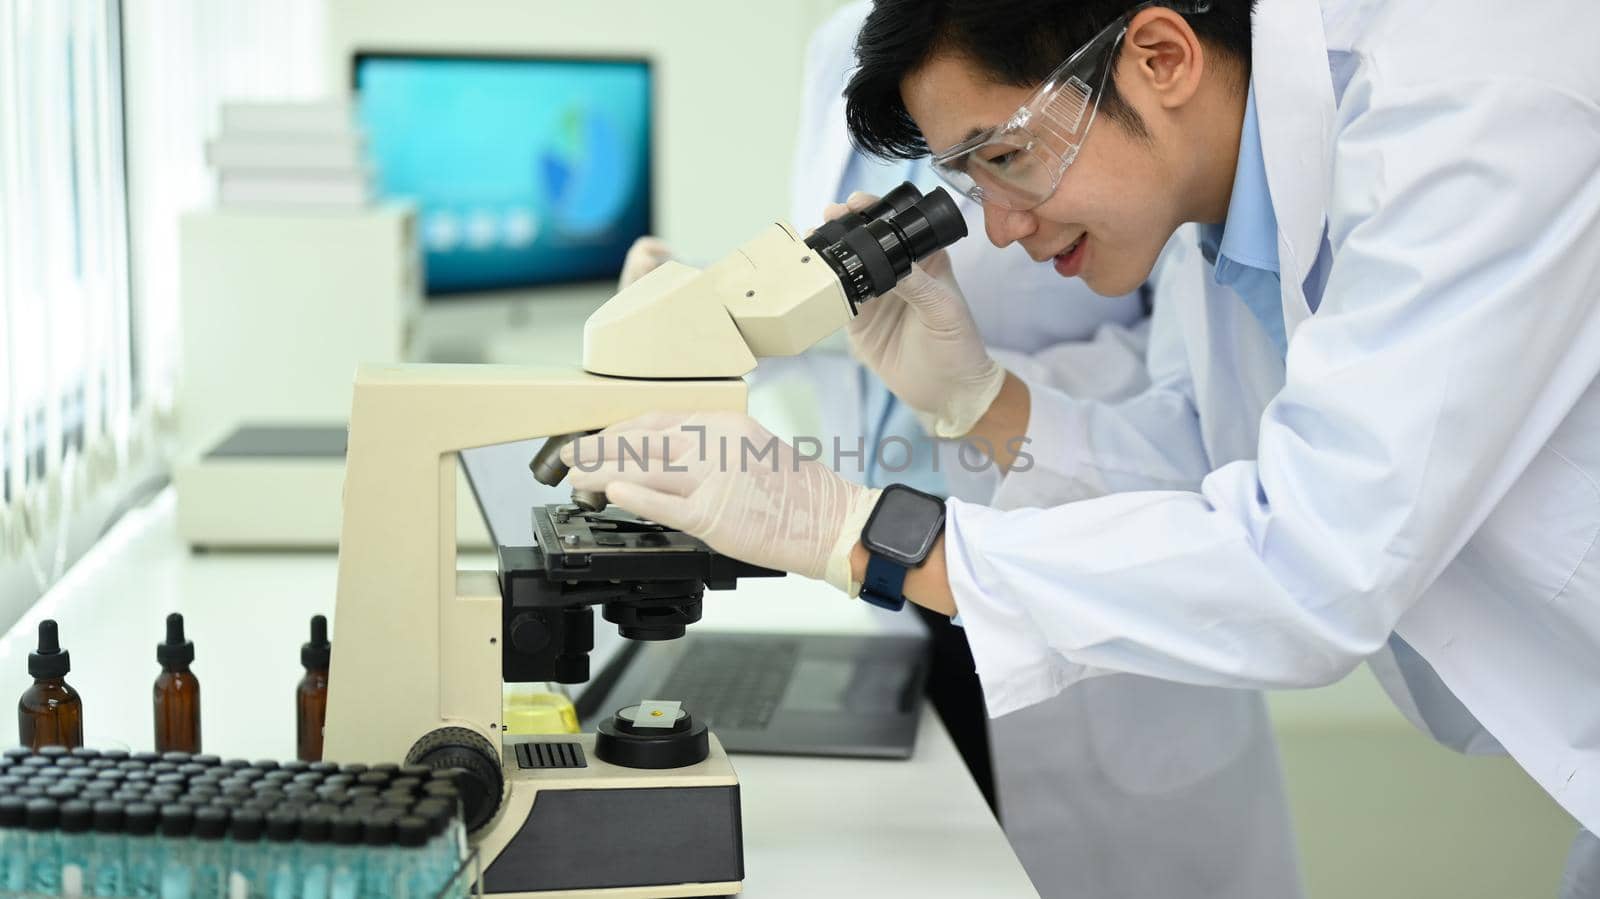 Professional biotechnology specialist looking under microscope, conducting experiment in a laboratory by prathanchorruangsak